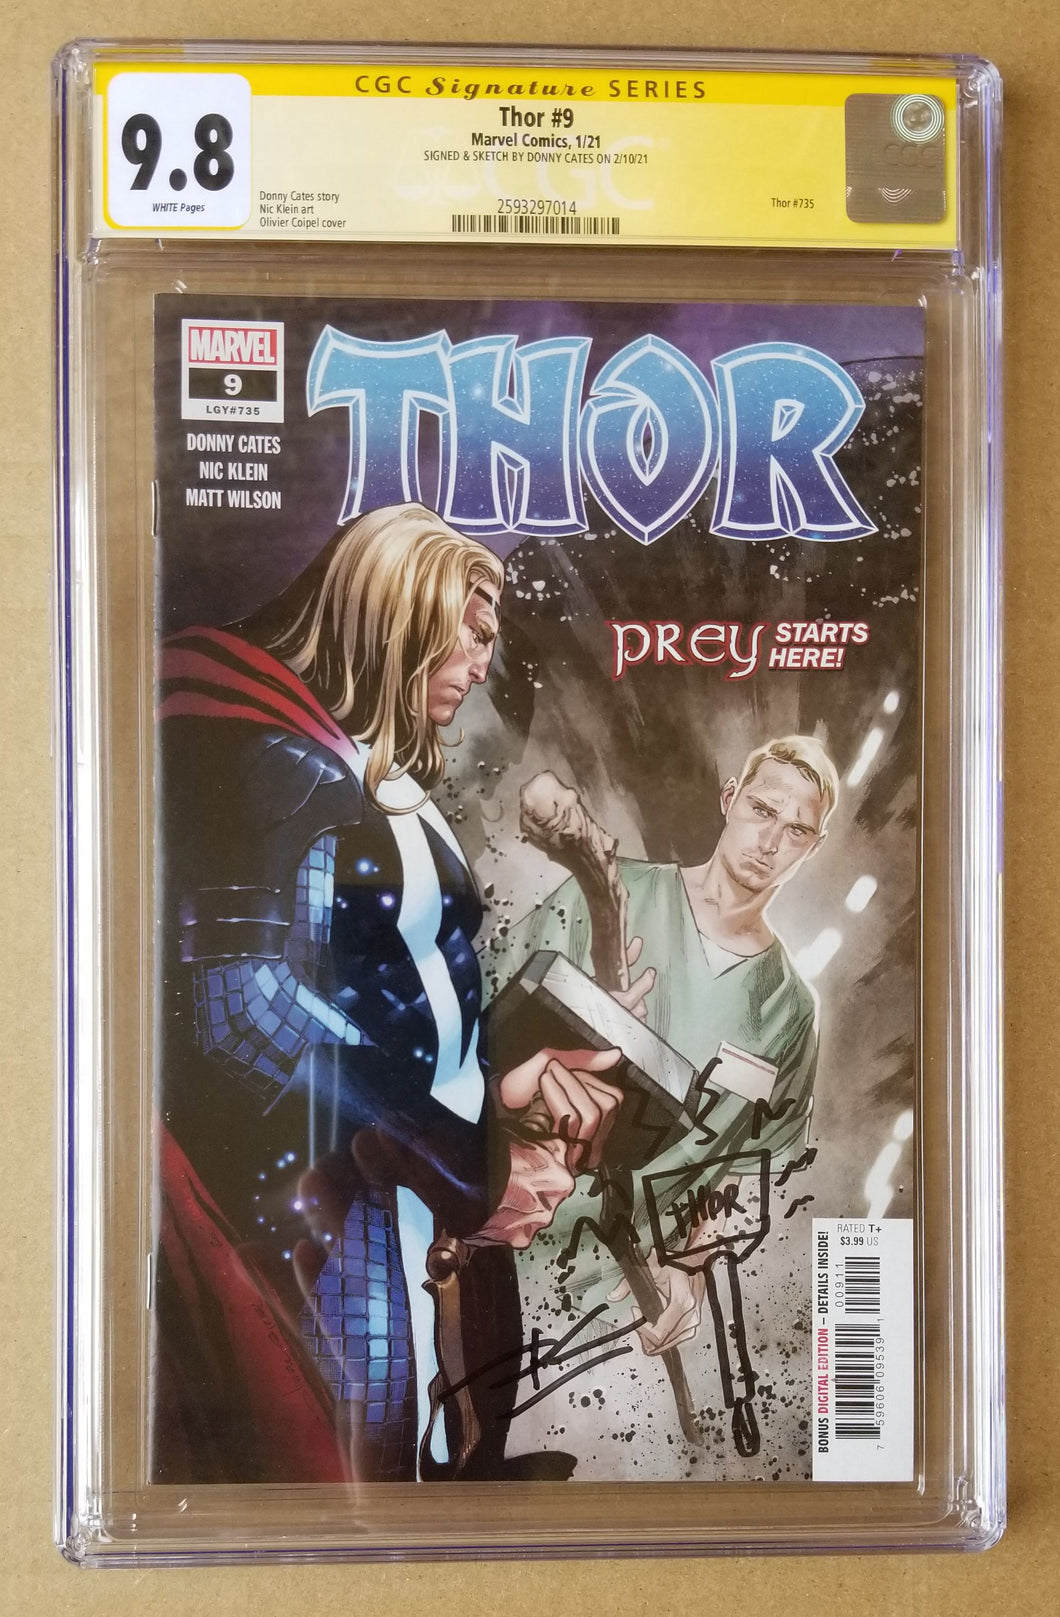 Thor #9 CGC SS 9.8 Signed / Remarked by Donny Cates